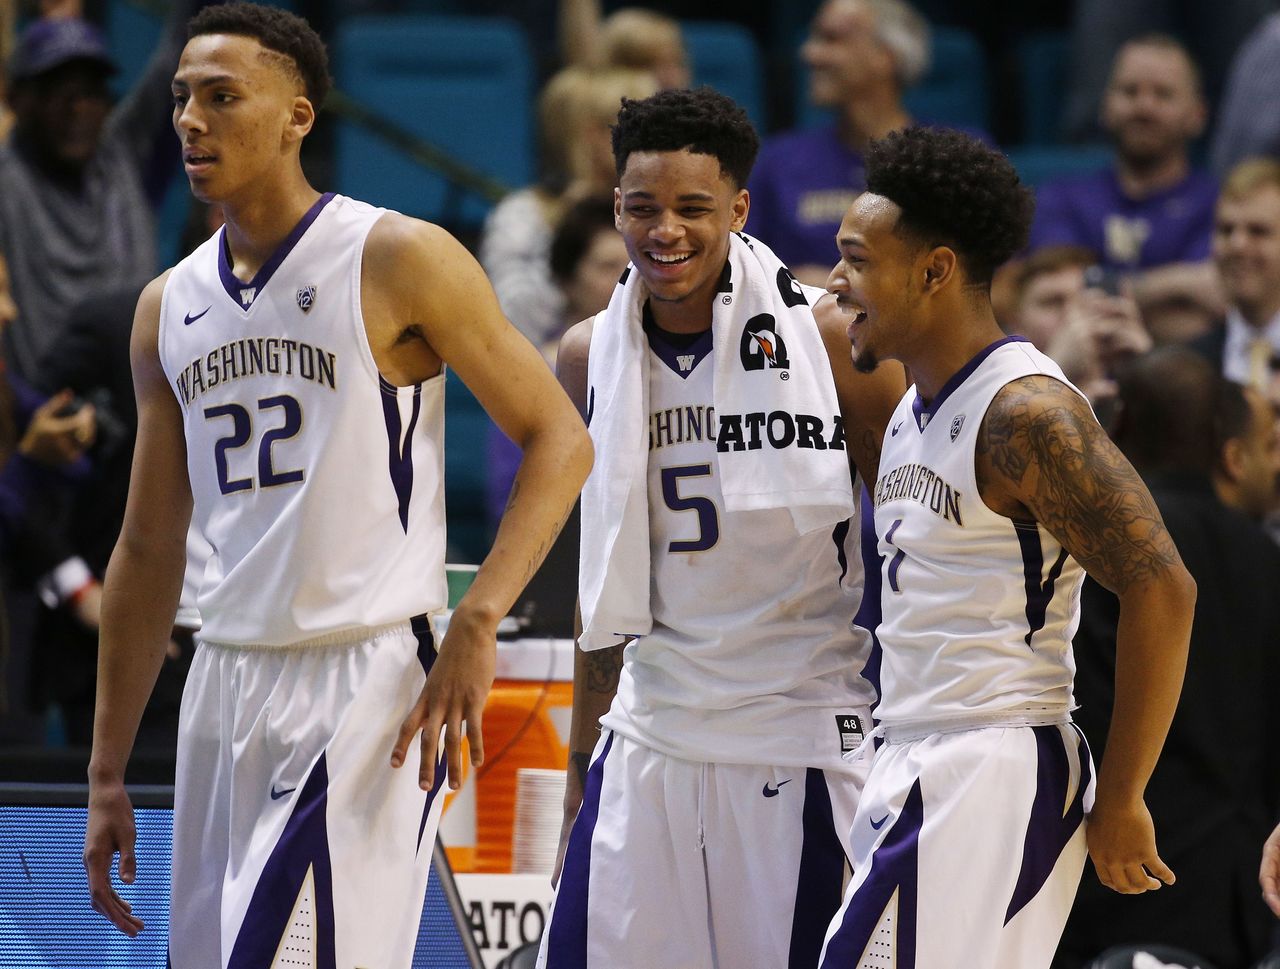 Washington forward Dominic Green (left) guard Dejounte Murray (center) and guard David Crisp react after defeating Stanford 91-68 in an NCAA college basketball game in the first round of the Pac-12 tournament Wednesday in Las Vegas.